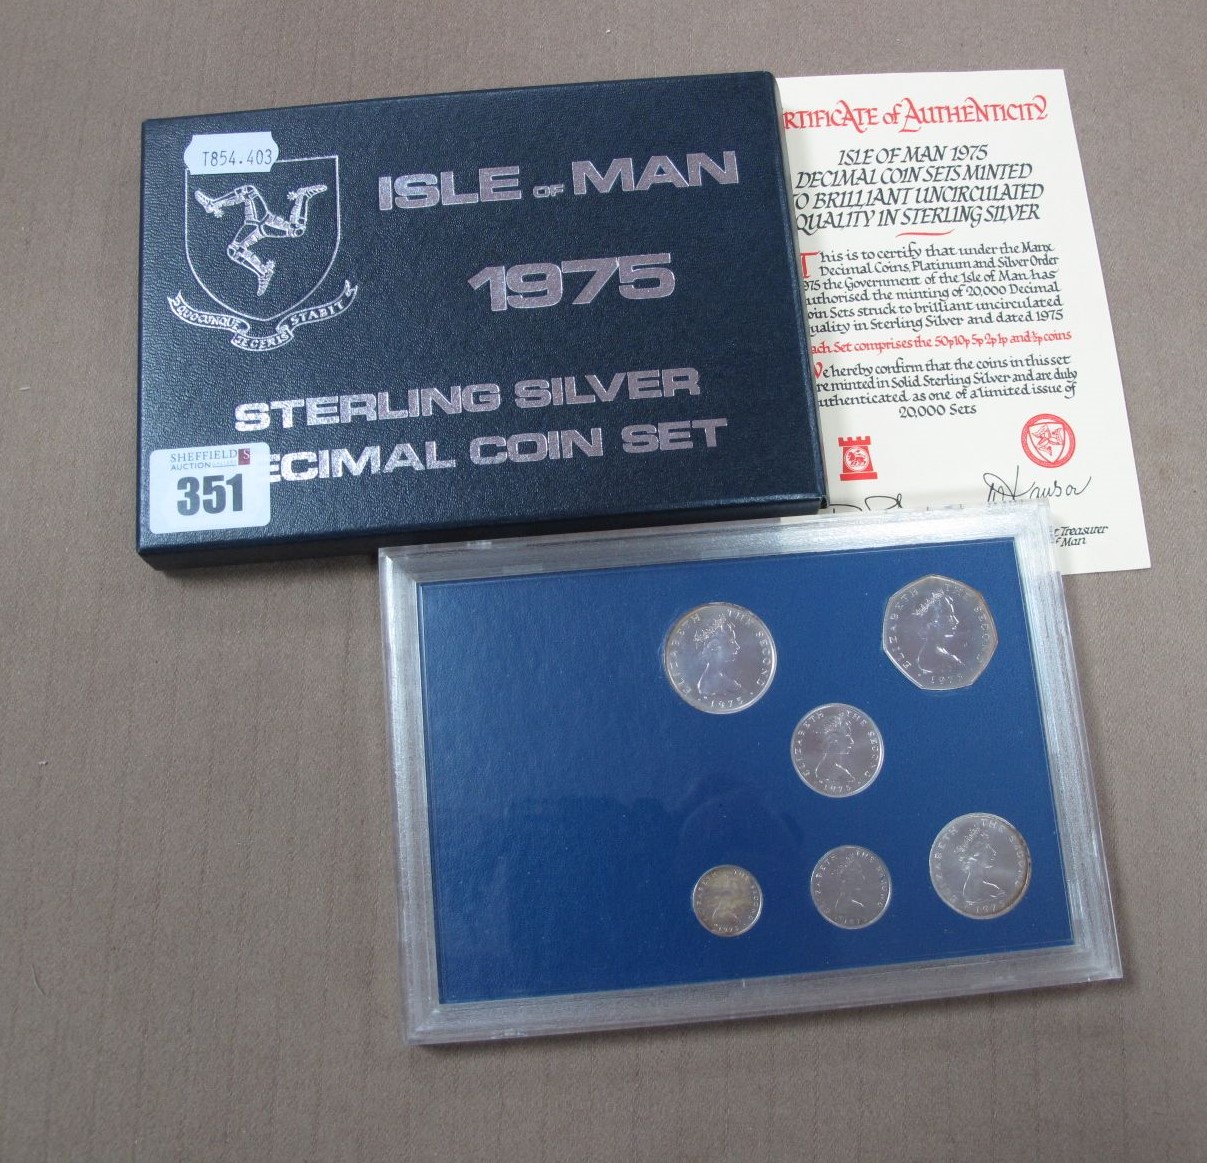 A 1975 Isle of Man Sterling Silver Decimal Coin Set, cased.